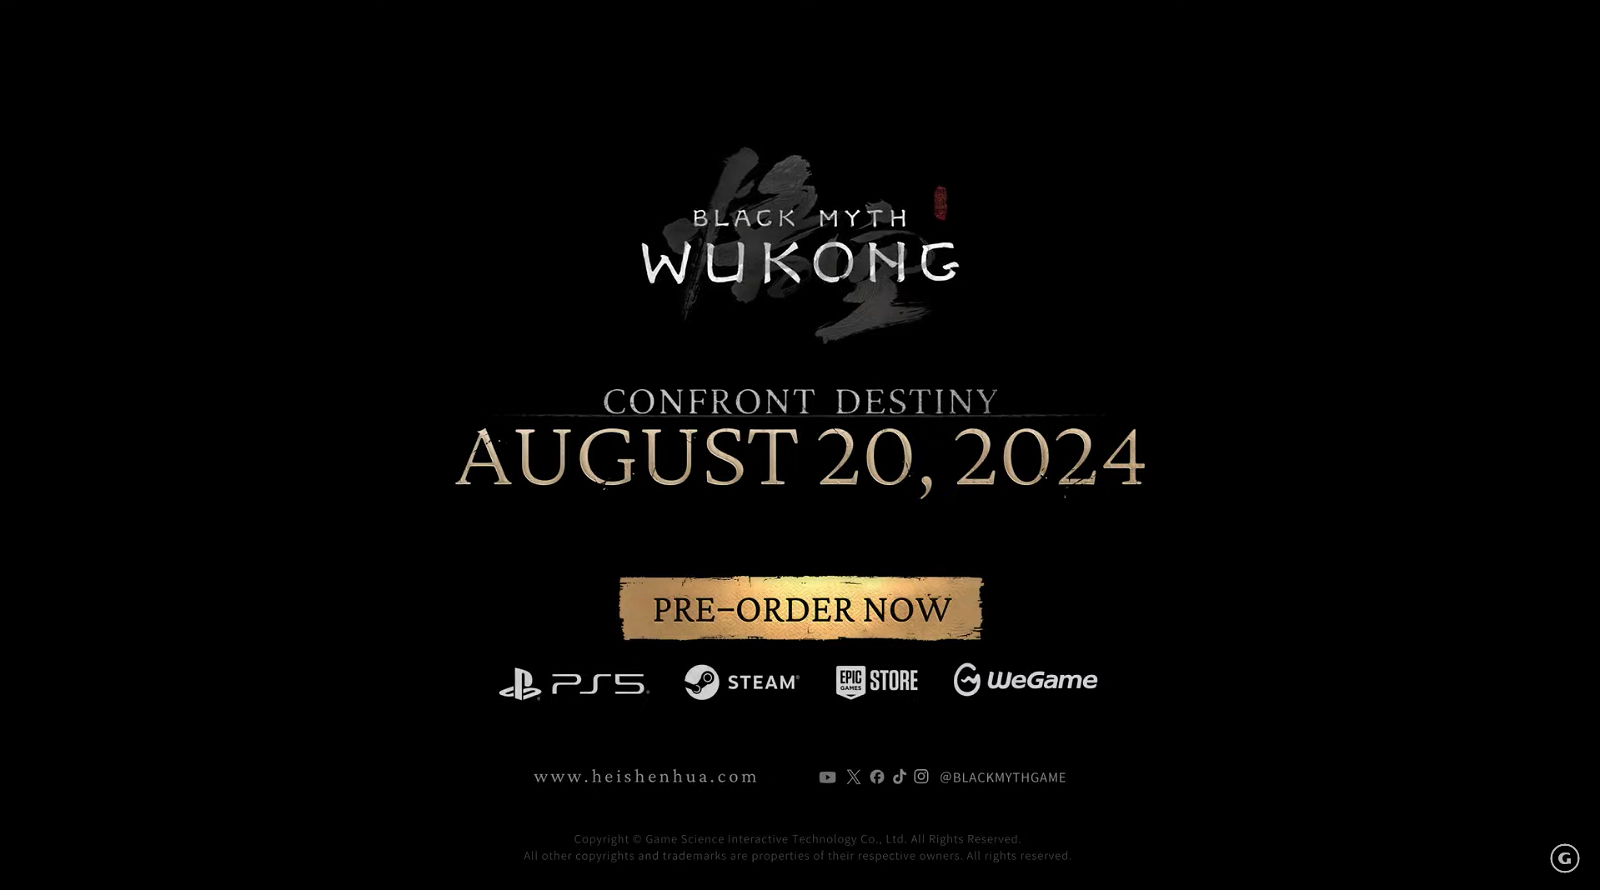 Game science has not yet officially announced a date for Black Myth: Wukong's Xbox release